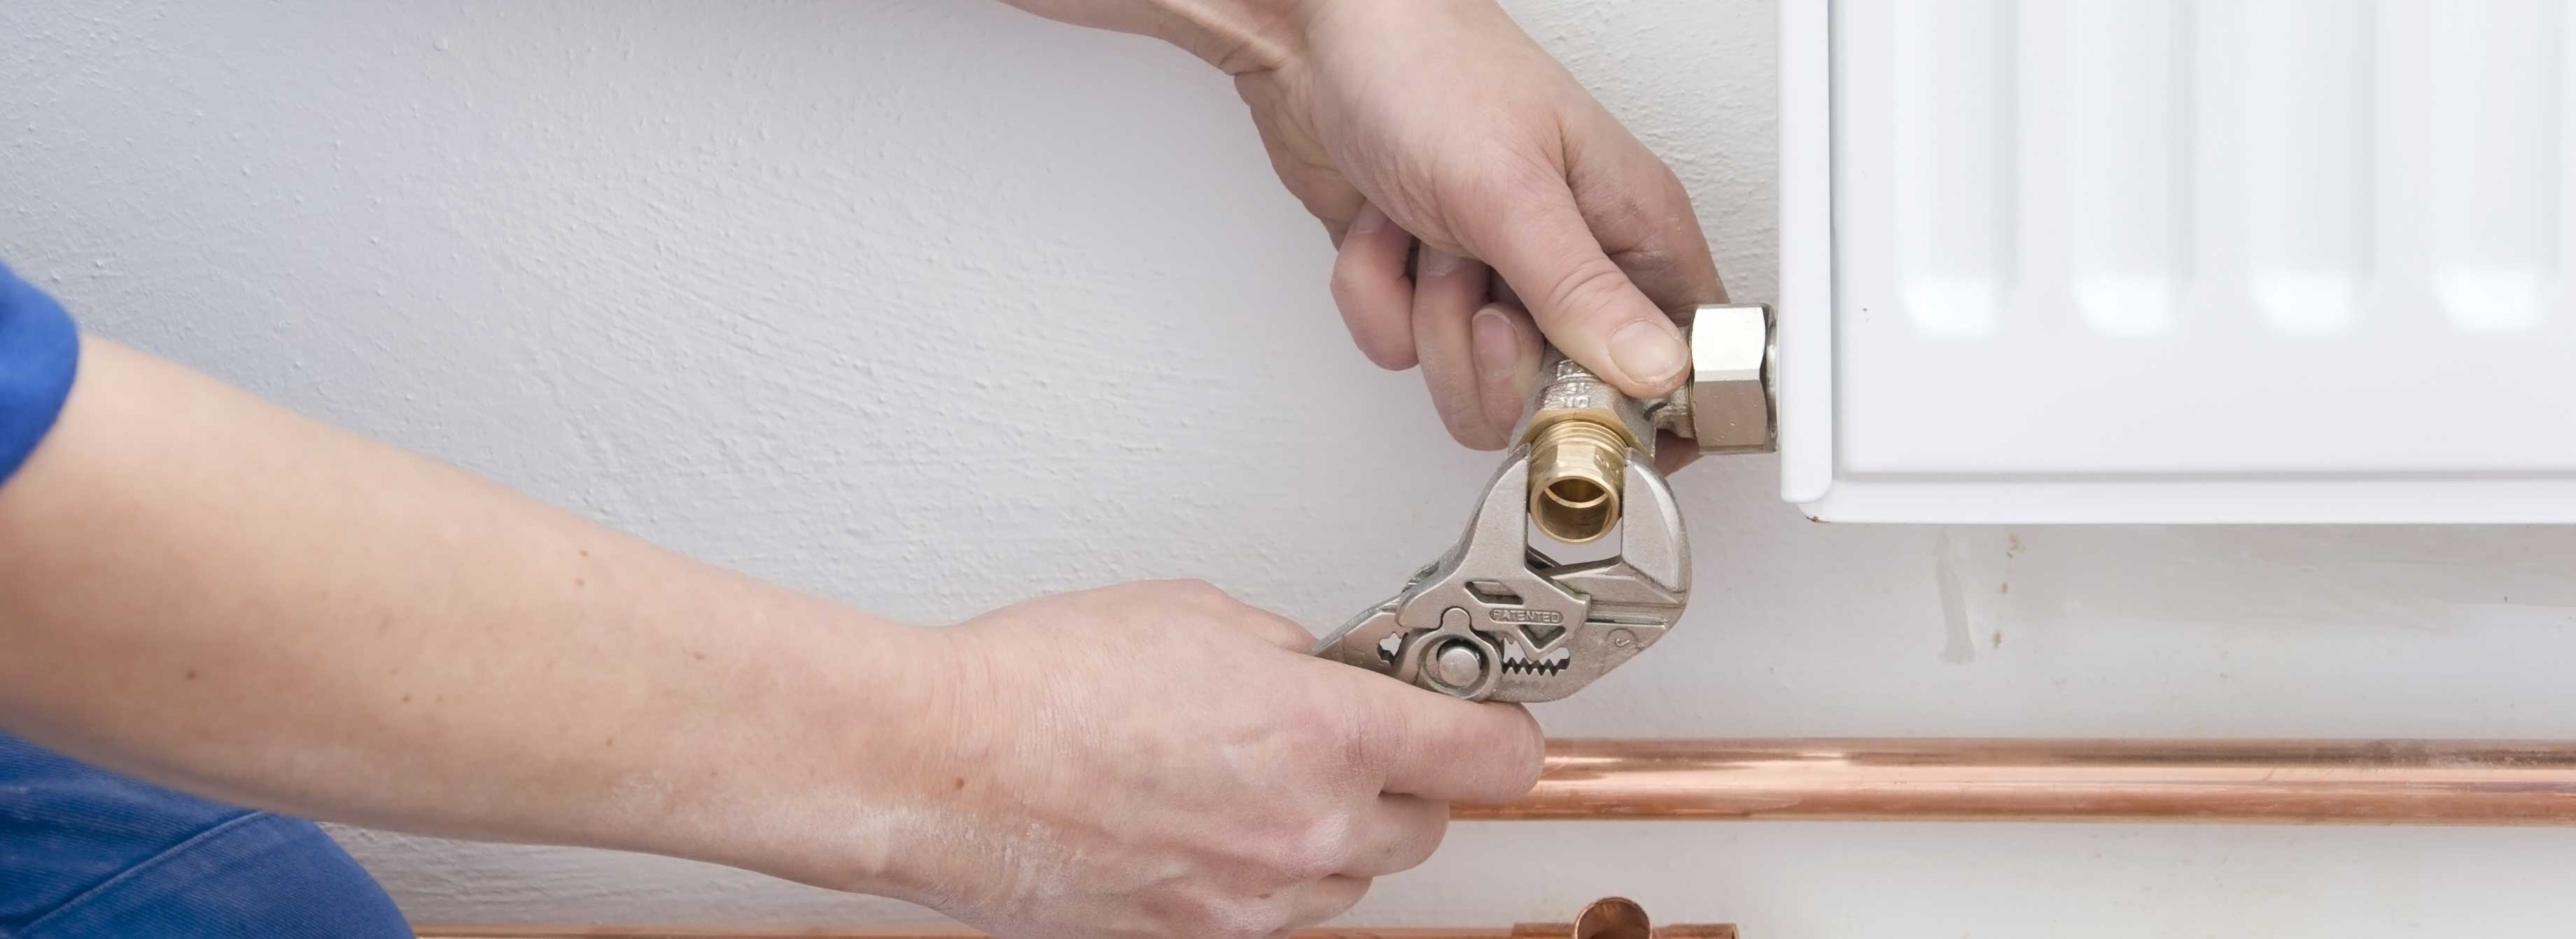 Plumbing and heating services Nottingham